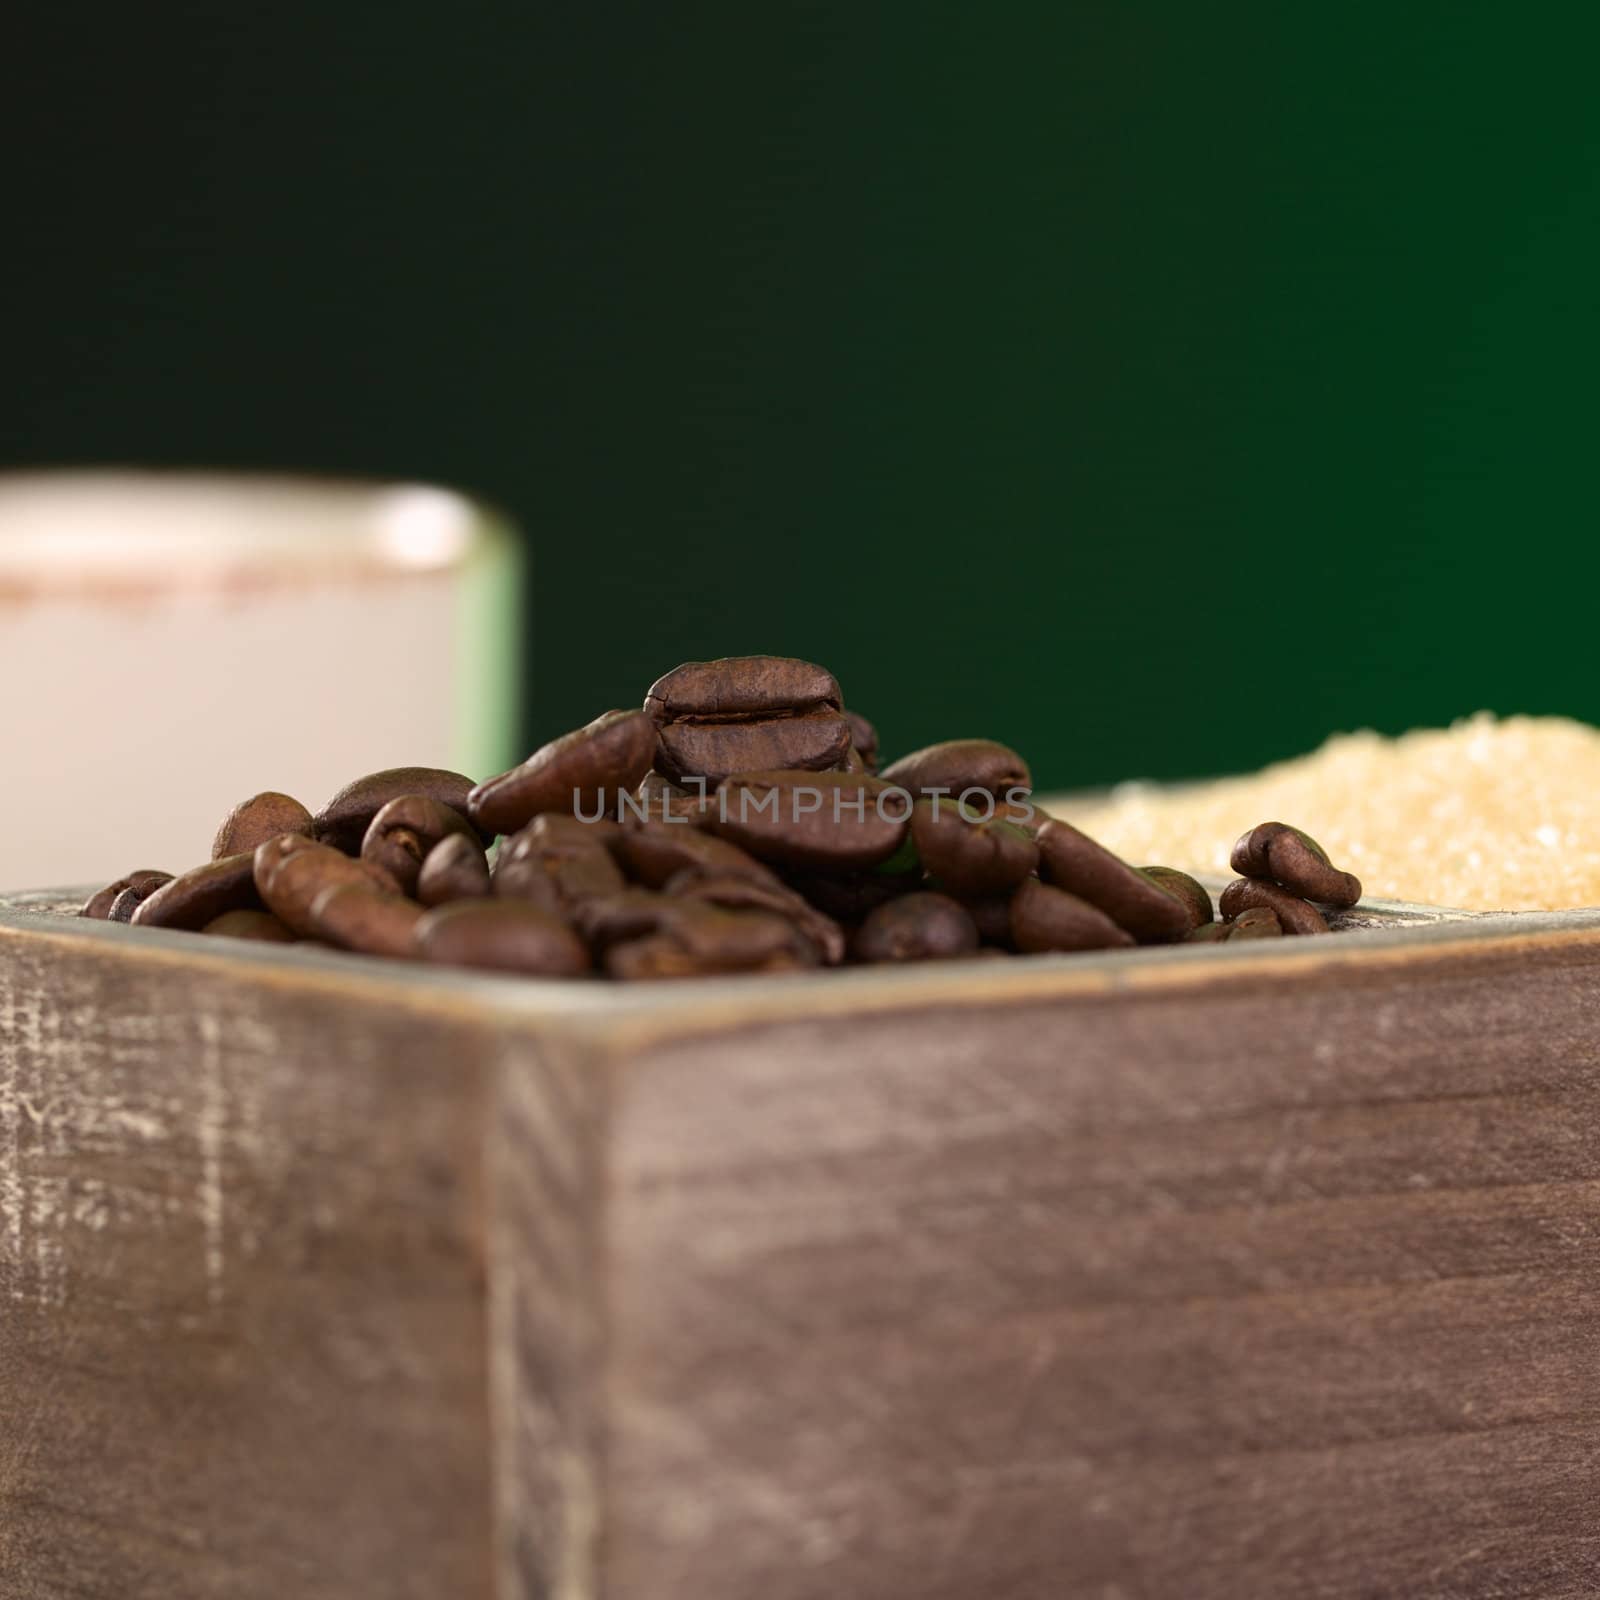 Roasted coffee beans and brown sugar in wooden container with coffee cup in the back and dark green background (Selective Focus, Focus on the coffee bean on the top of the pile)